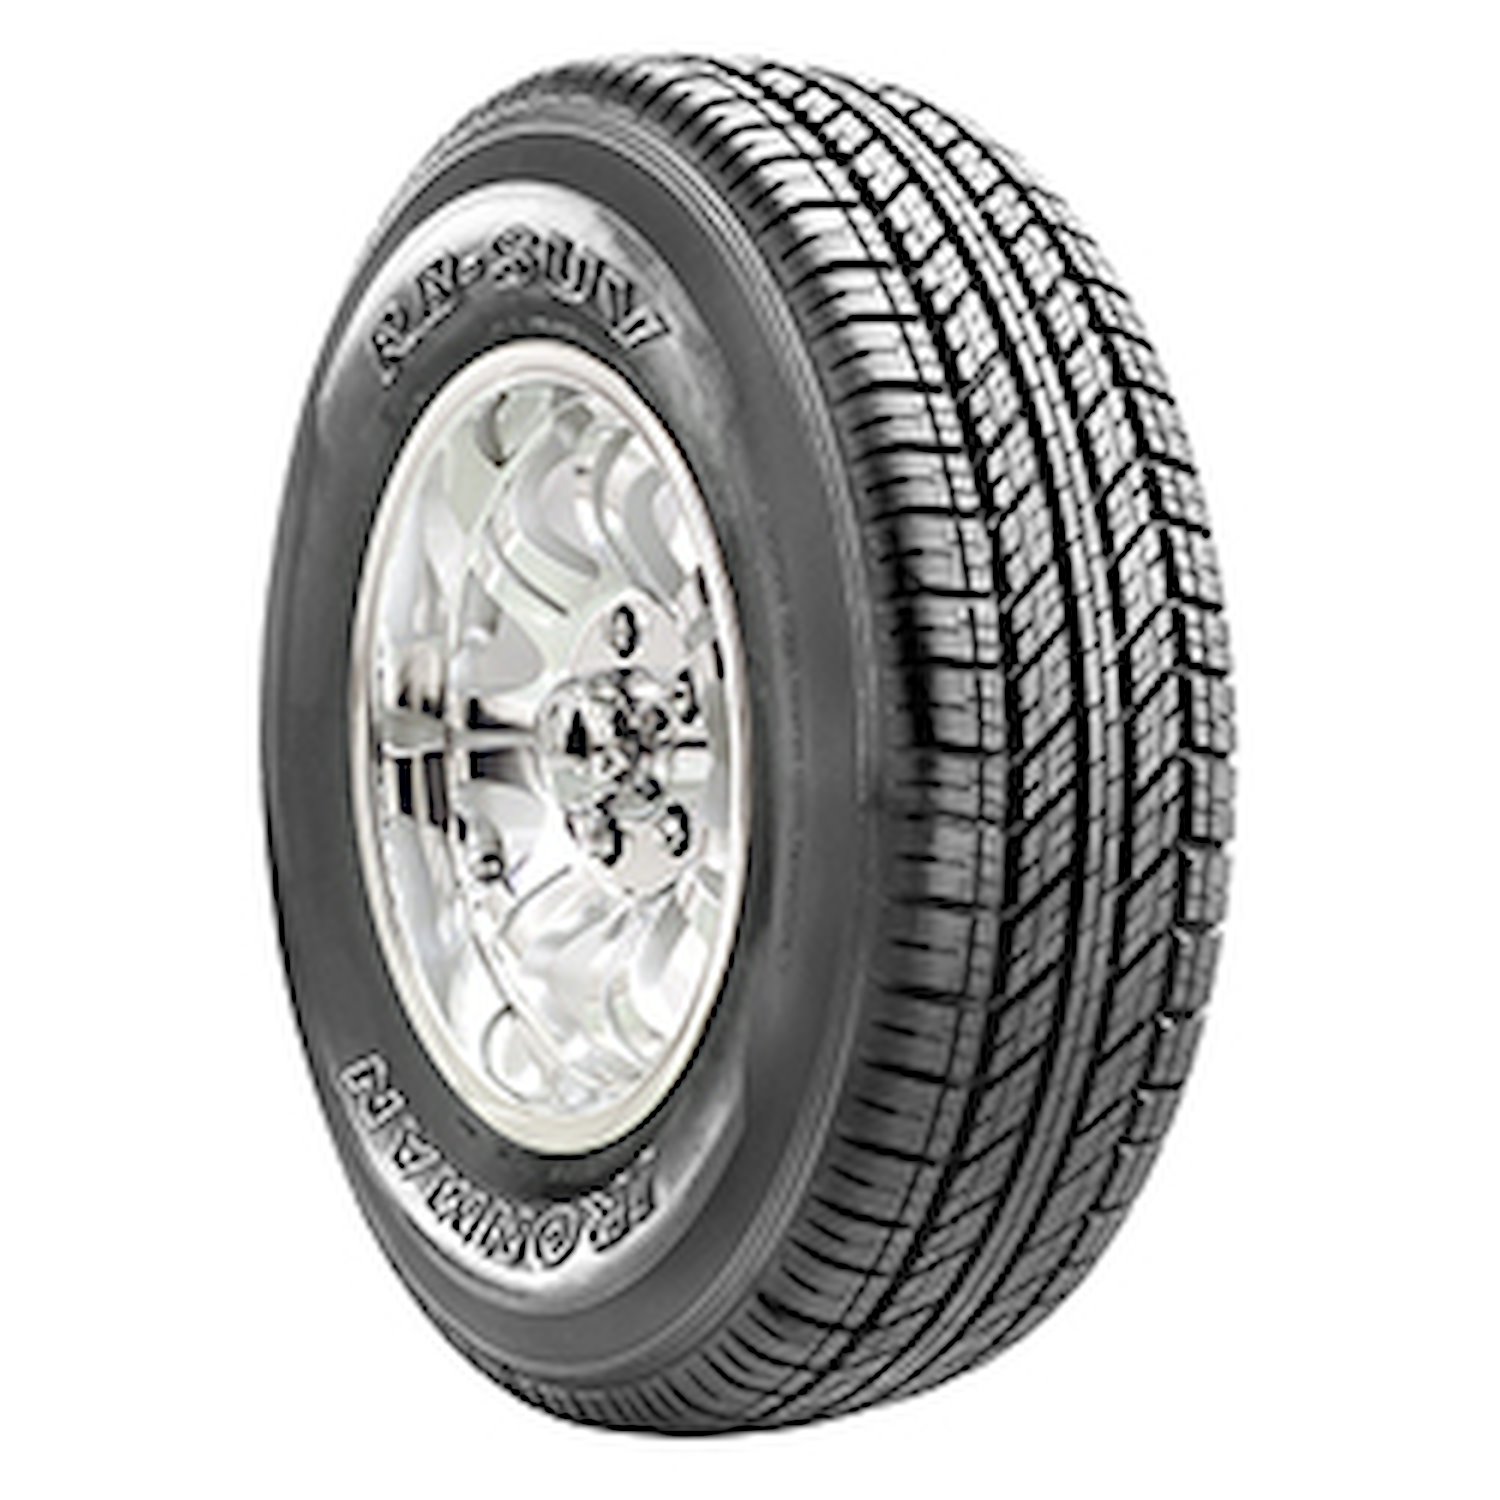 RB SUV Tire, 235/70R16 106S